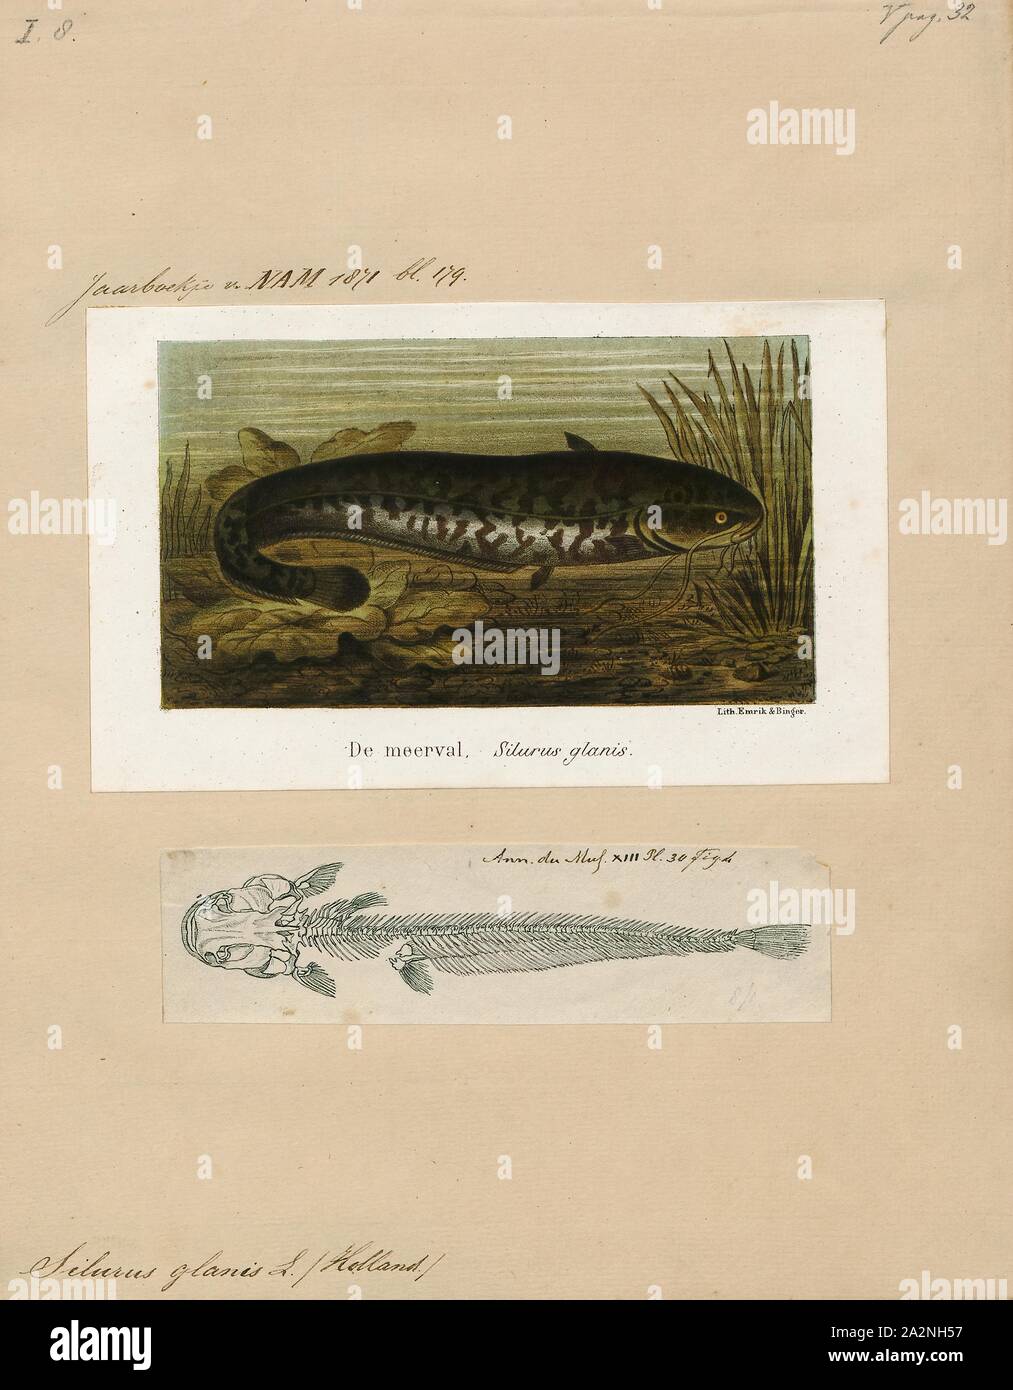 Silurus glanis, Print, The wels catfish, also called sheatfish, is a large species of catfish native to wide areas of central, southern, and eastern Europe, in the basins of the Baltic, Black, and Caspian Seas. It has been introduced to Western Europe as a prized sport fish and is now found from the United Kingdom east to Kazakhstan and China and south to Greece and Turkey. It is a scaleless freshwater fish recognizable by its broad, flat head and wide mouth. Wels catfish can live for at least fifty years., 1700-1880 Stock Photo